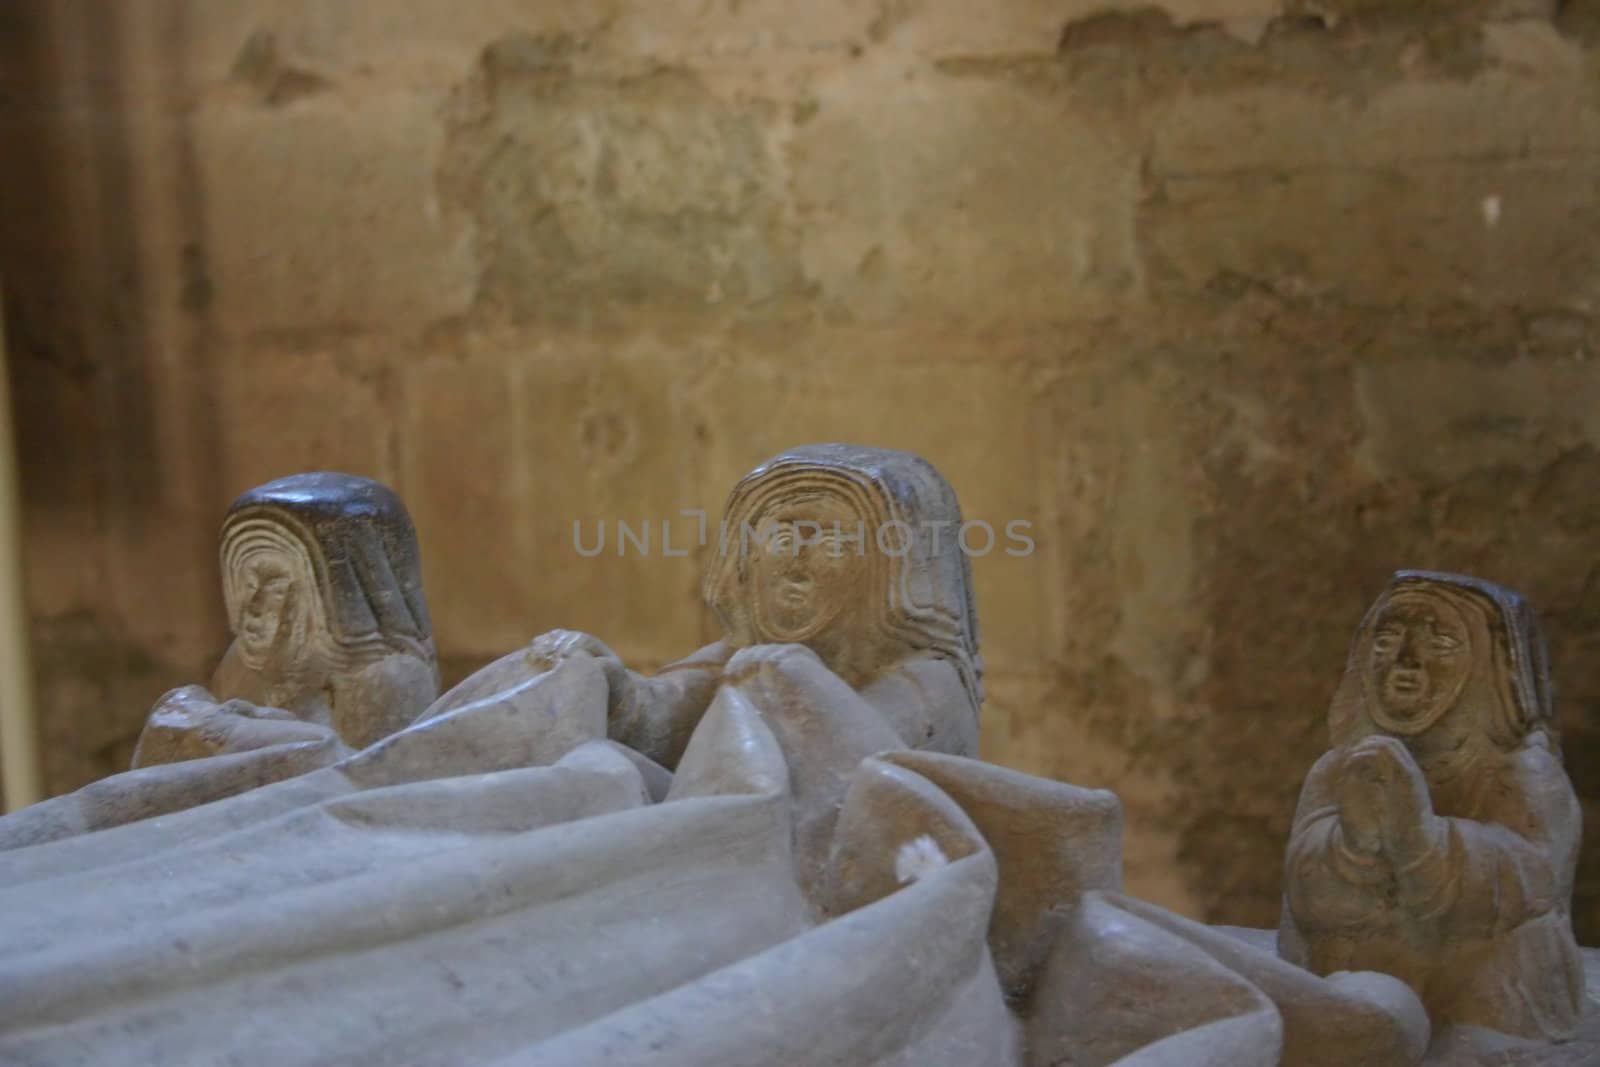 Deatail of the tomb of the Blessed Dona Urraca, cister monastery in Canas, Rioja, Spain